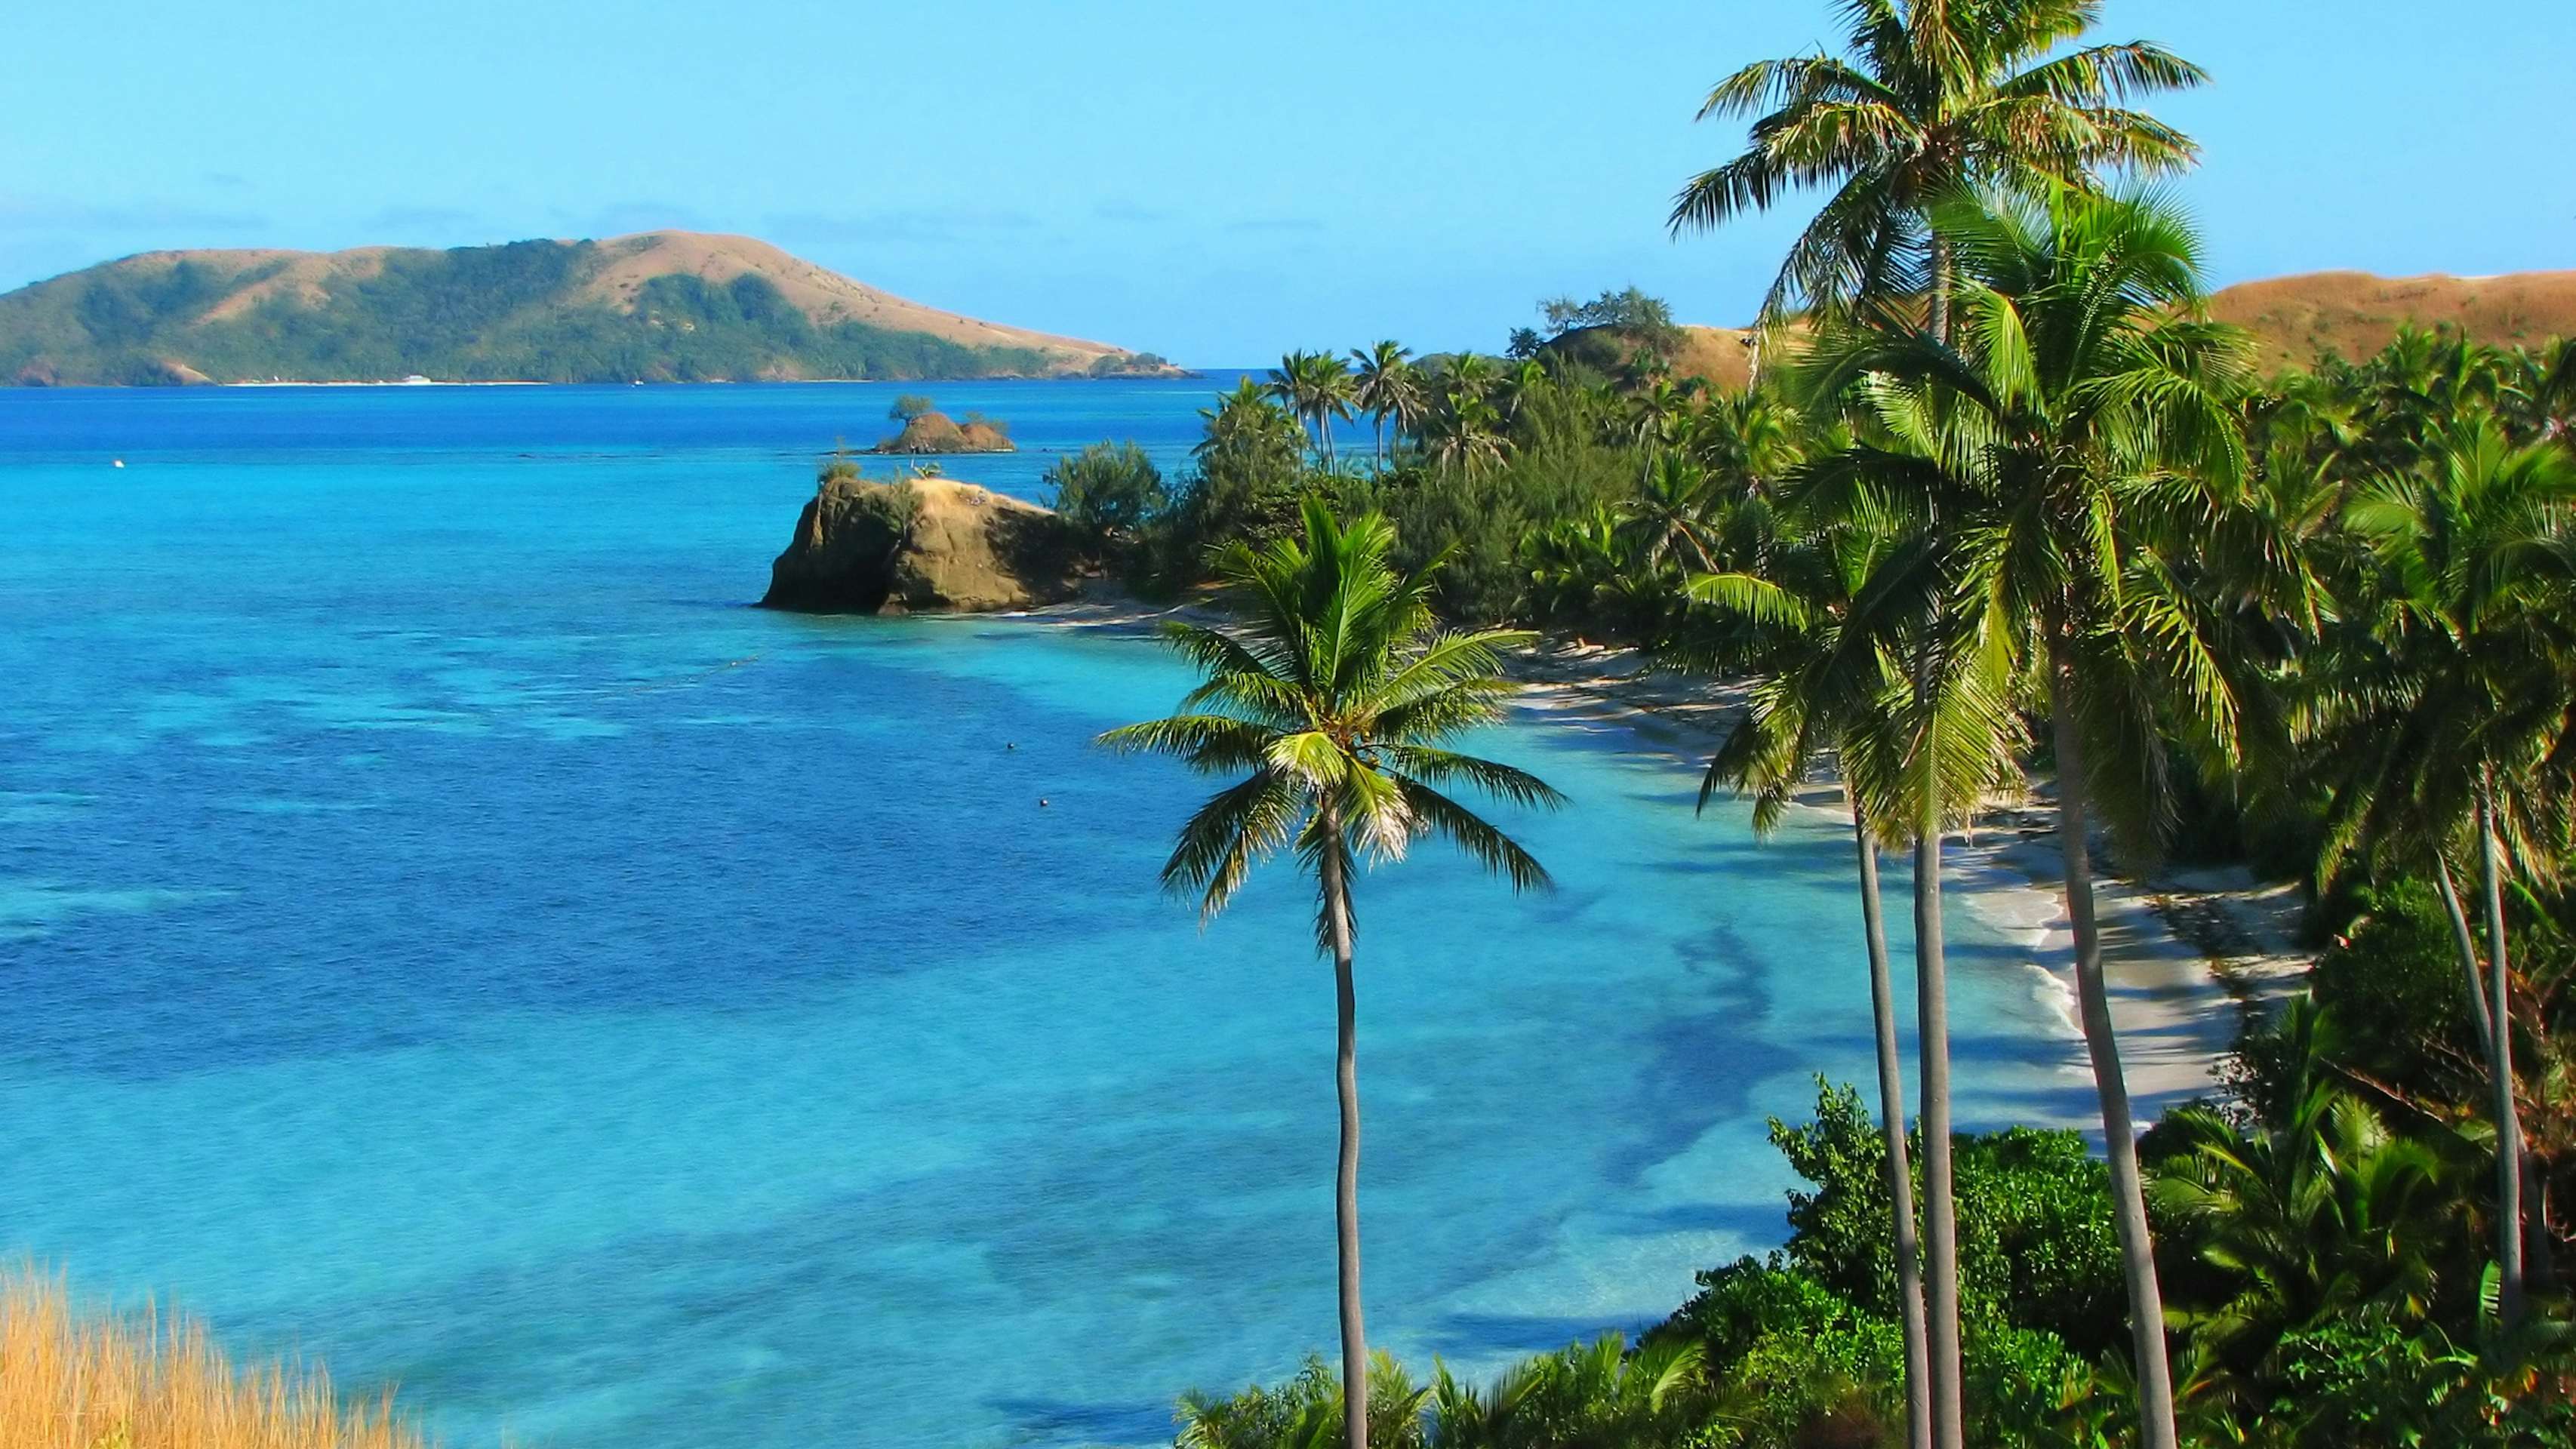 Fiji Yacht Charter - Tropical paradise in Fiji with blue waters and stunning palm trees